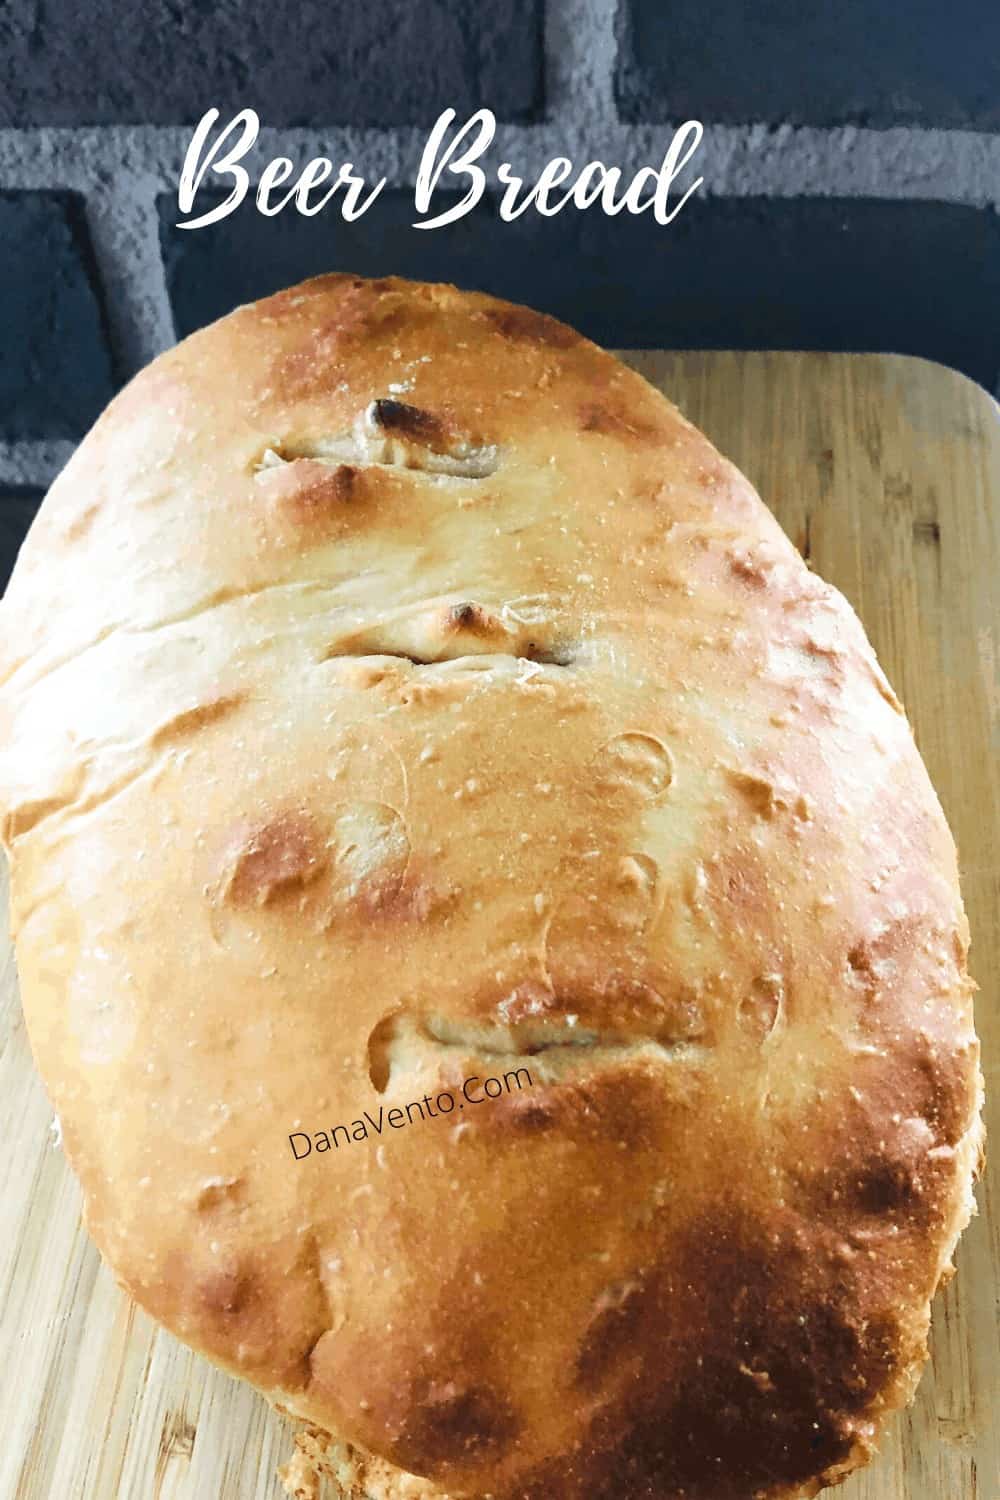 Loaf of bread made with beer and olive oil